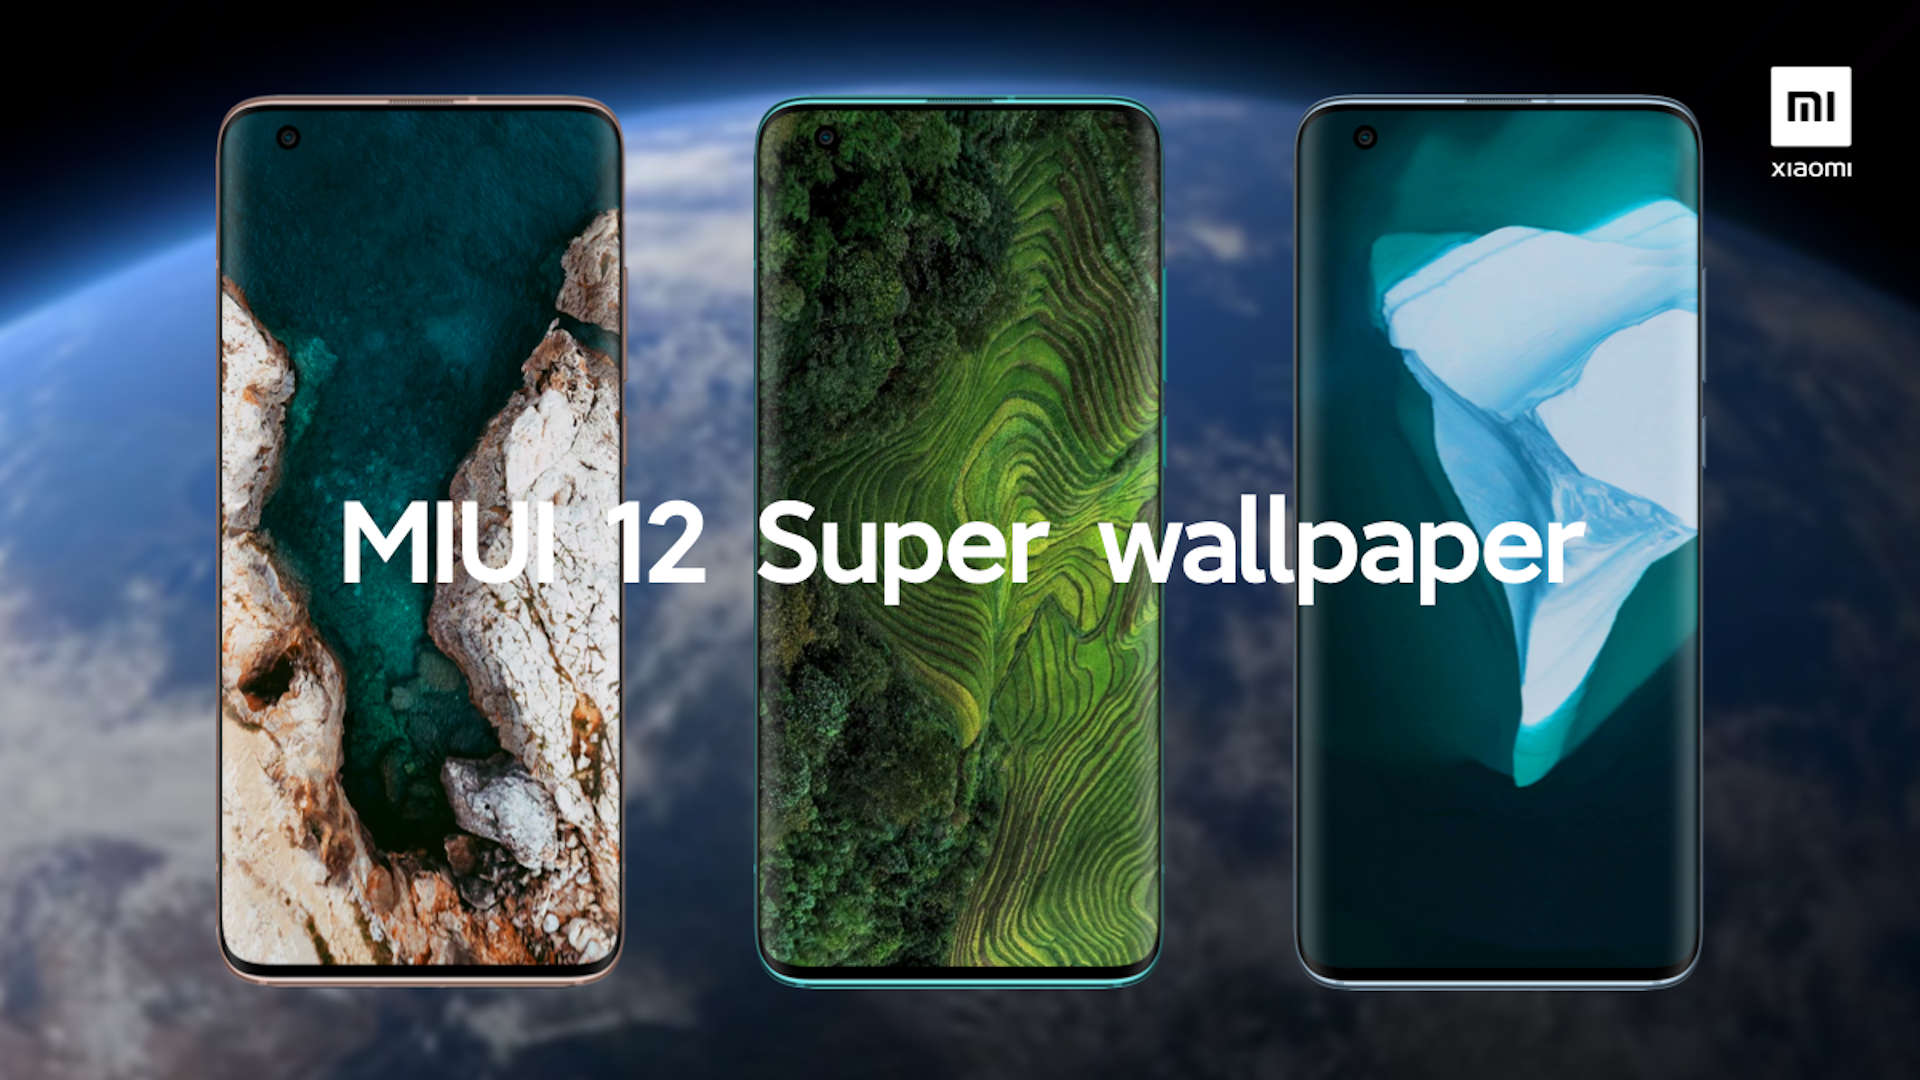 Xiaomi and MIUI 12, don't you have Super Wallpaper? Performance Issues